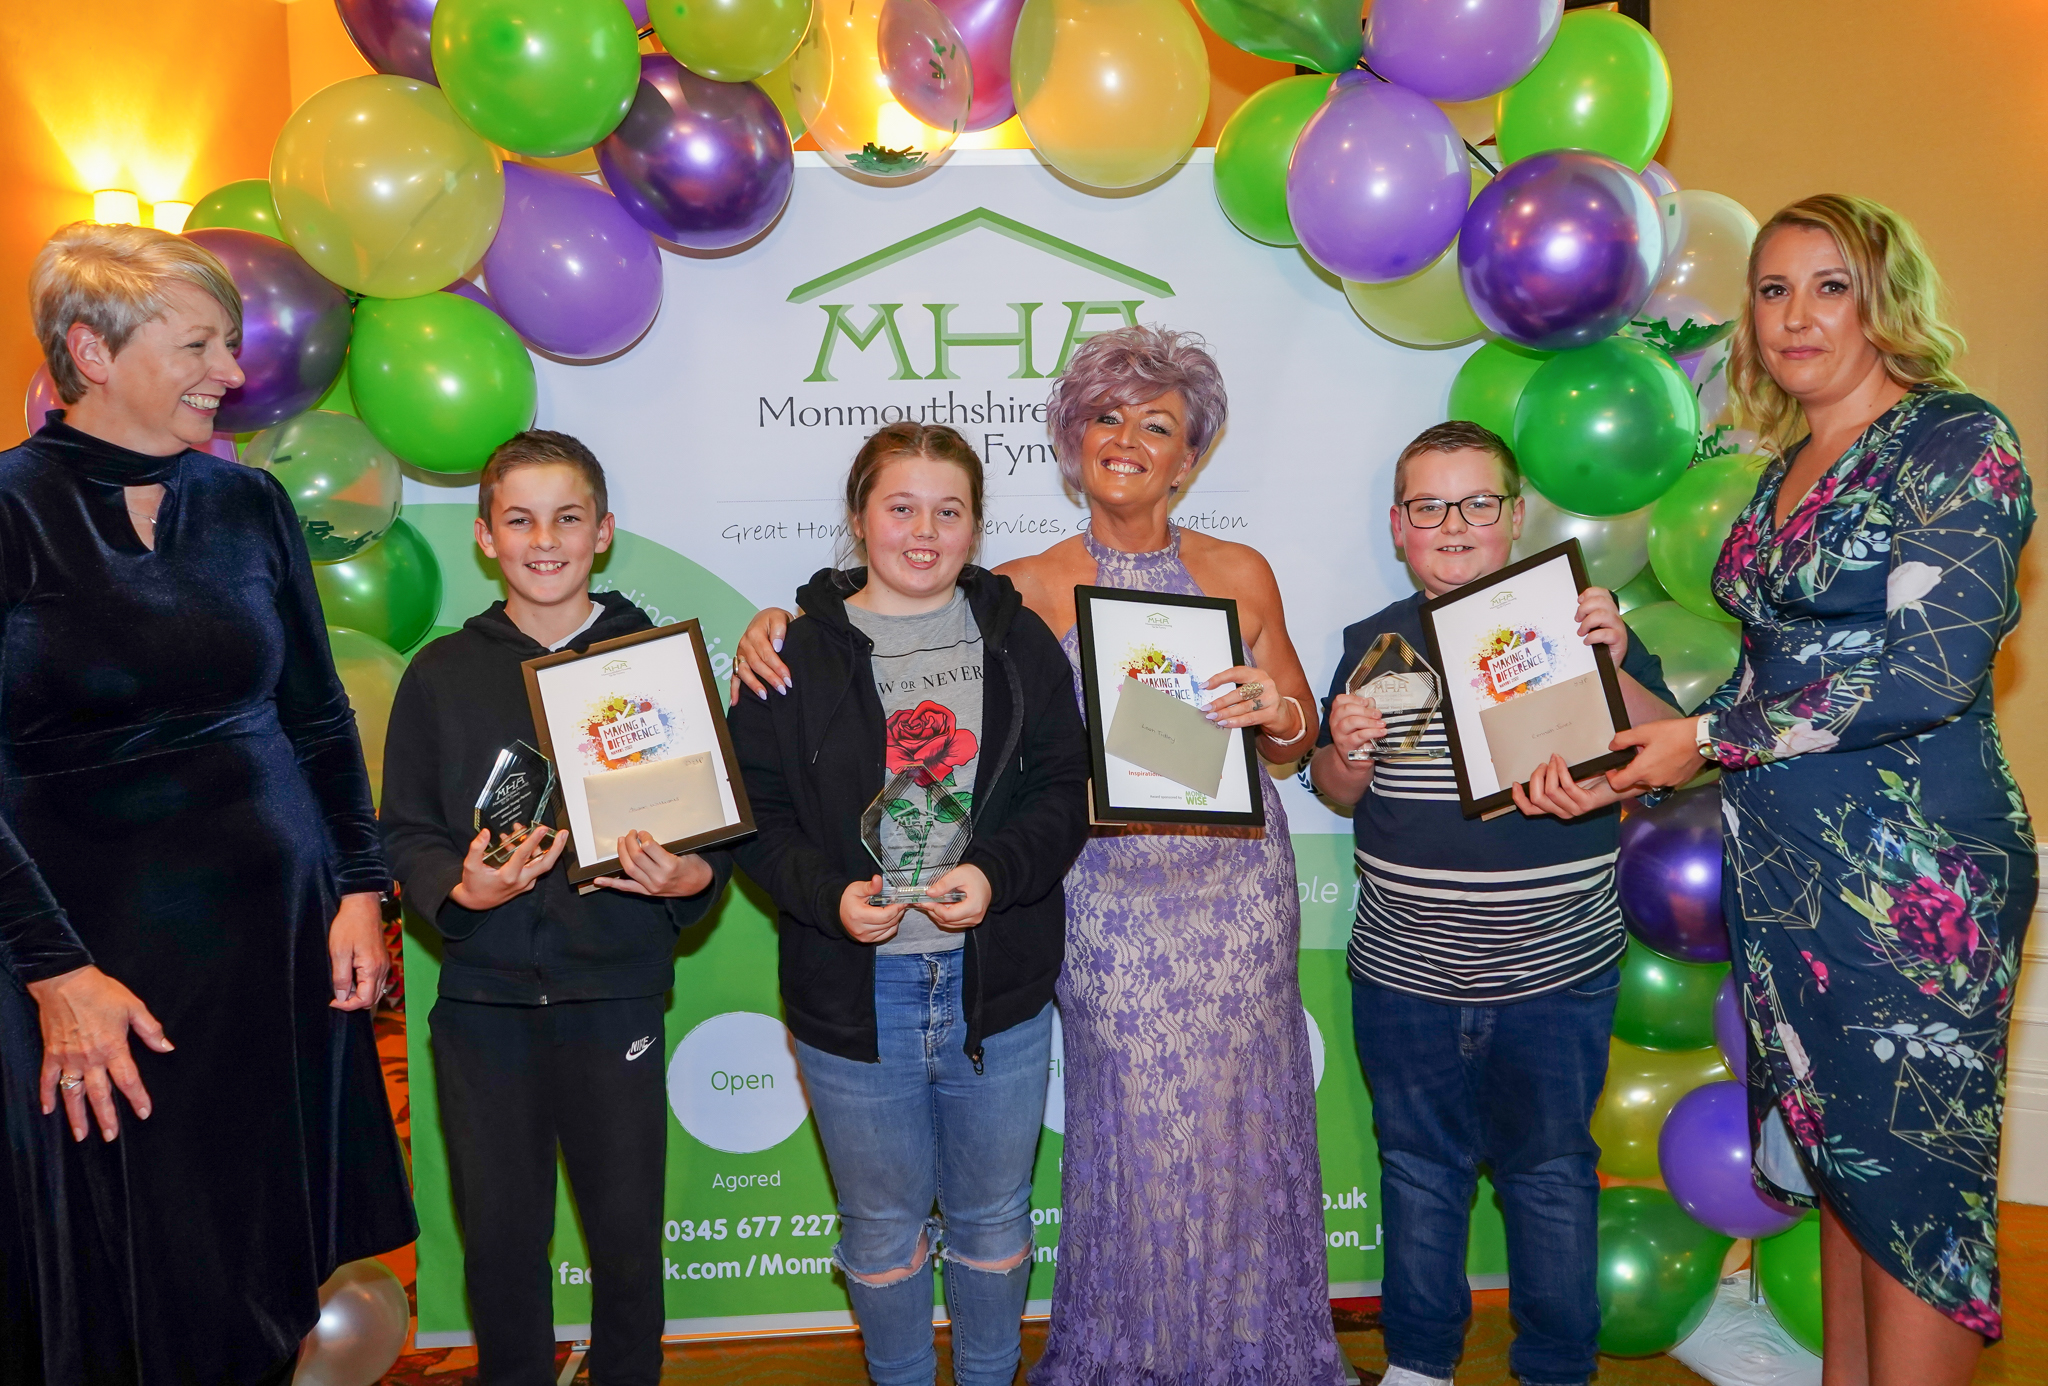 Inspirational Young Person(s) award was jointly won by Leah Tidley and Isaac Williams, and Connah Jones.